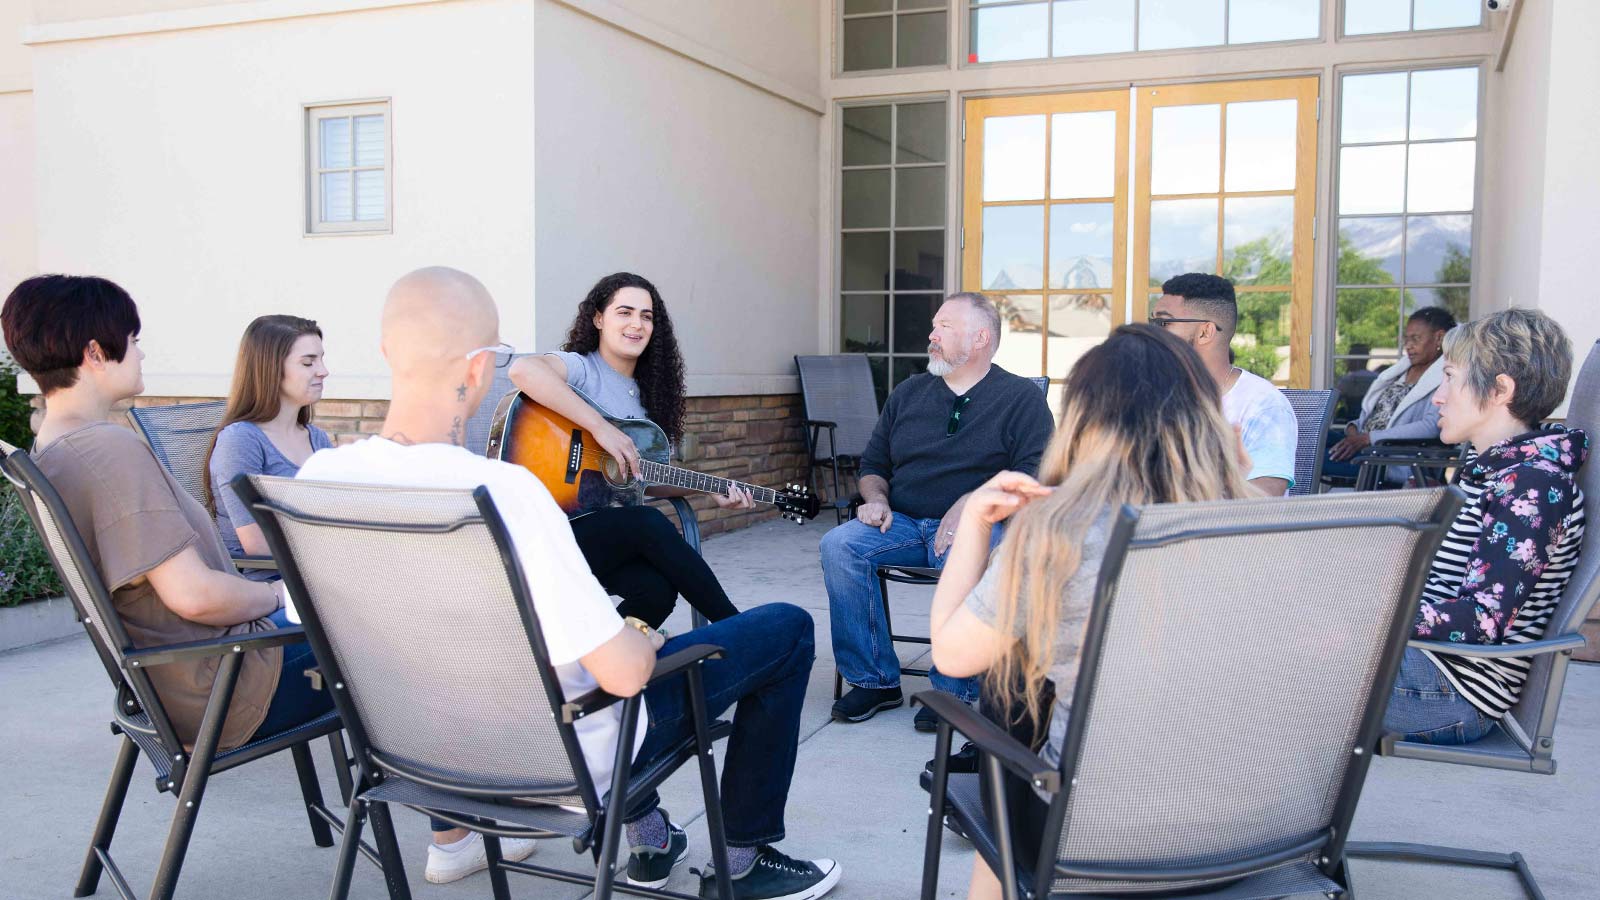 A group of people seated in chairs outdoors in a circle with a woman playing guitar and singing.